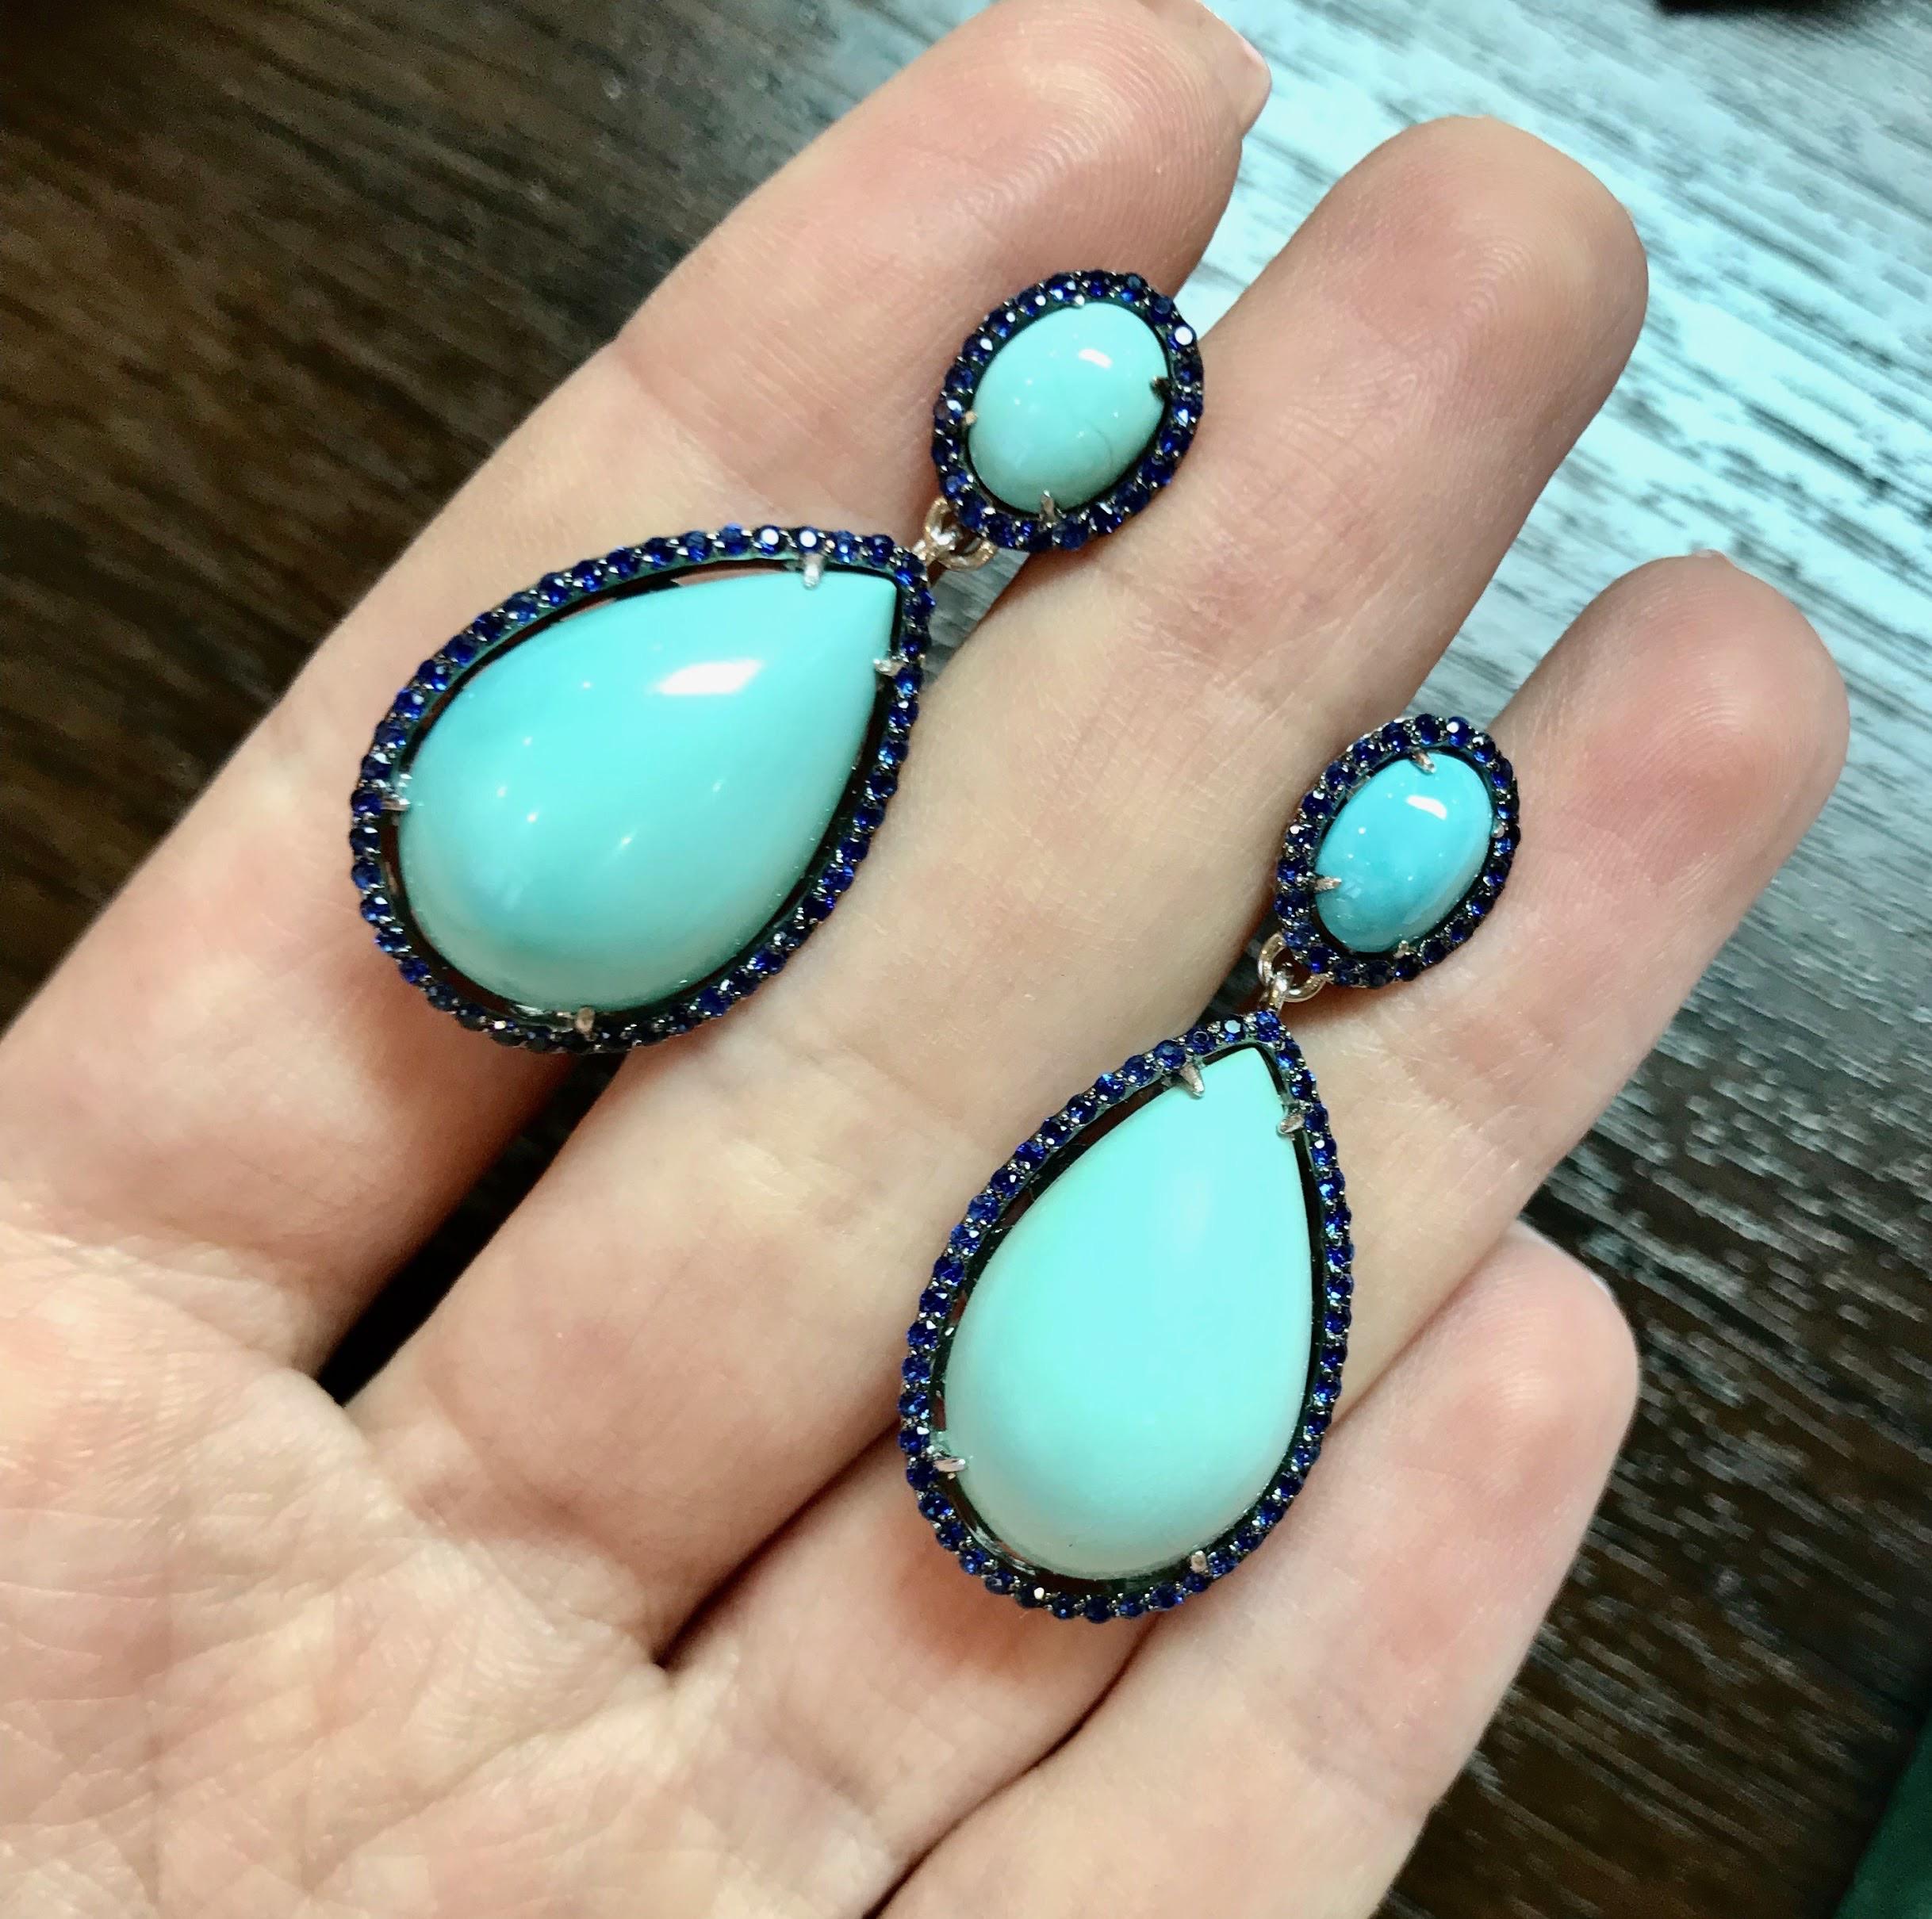 Turquoise - from Persian 